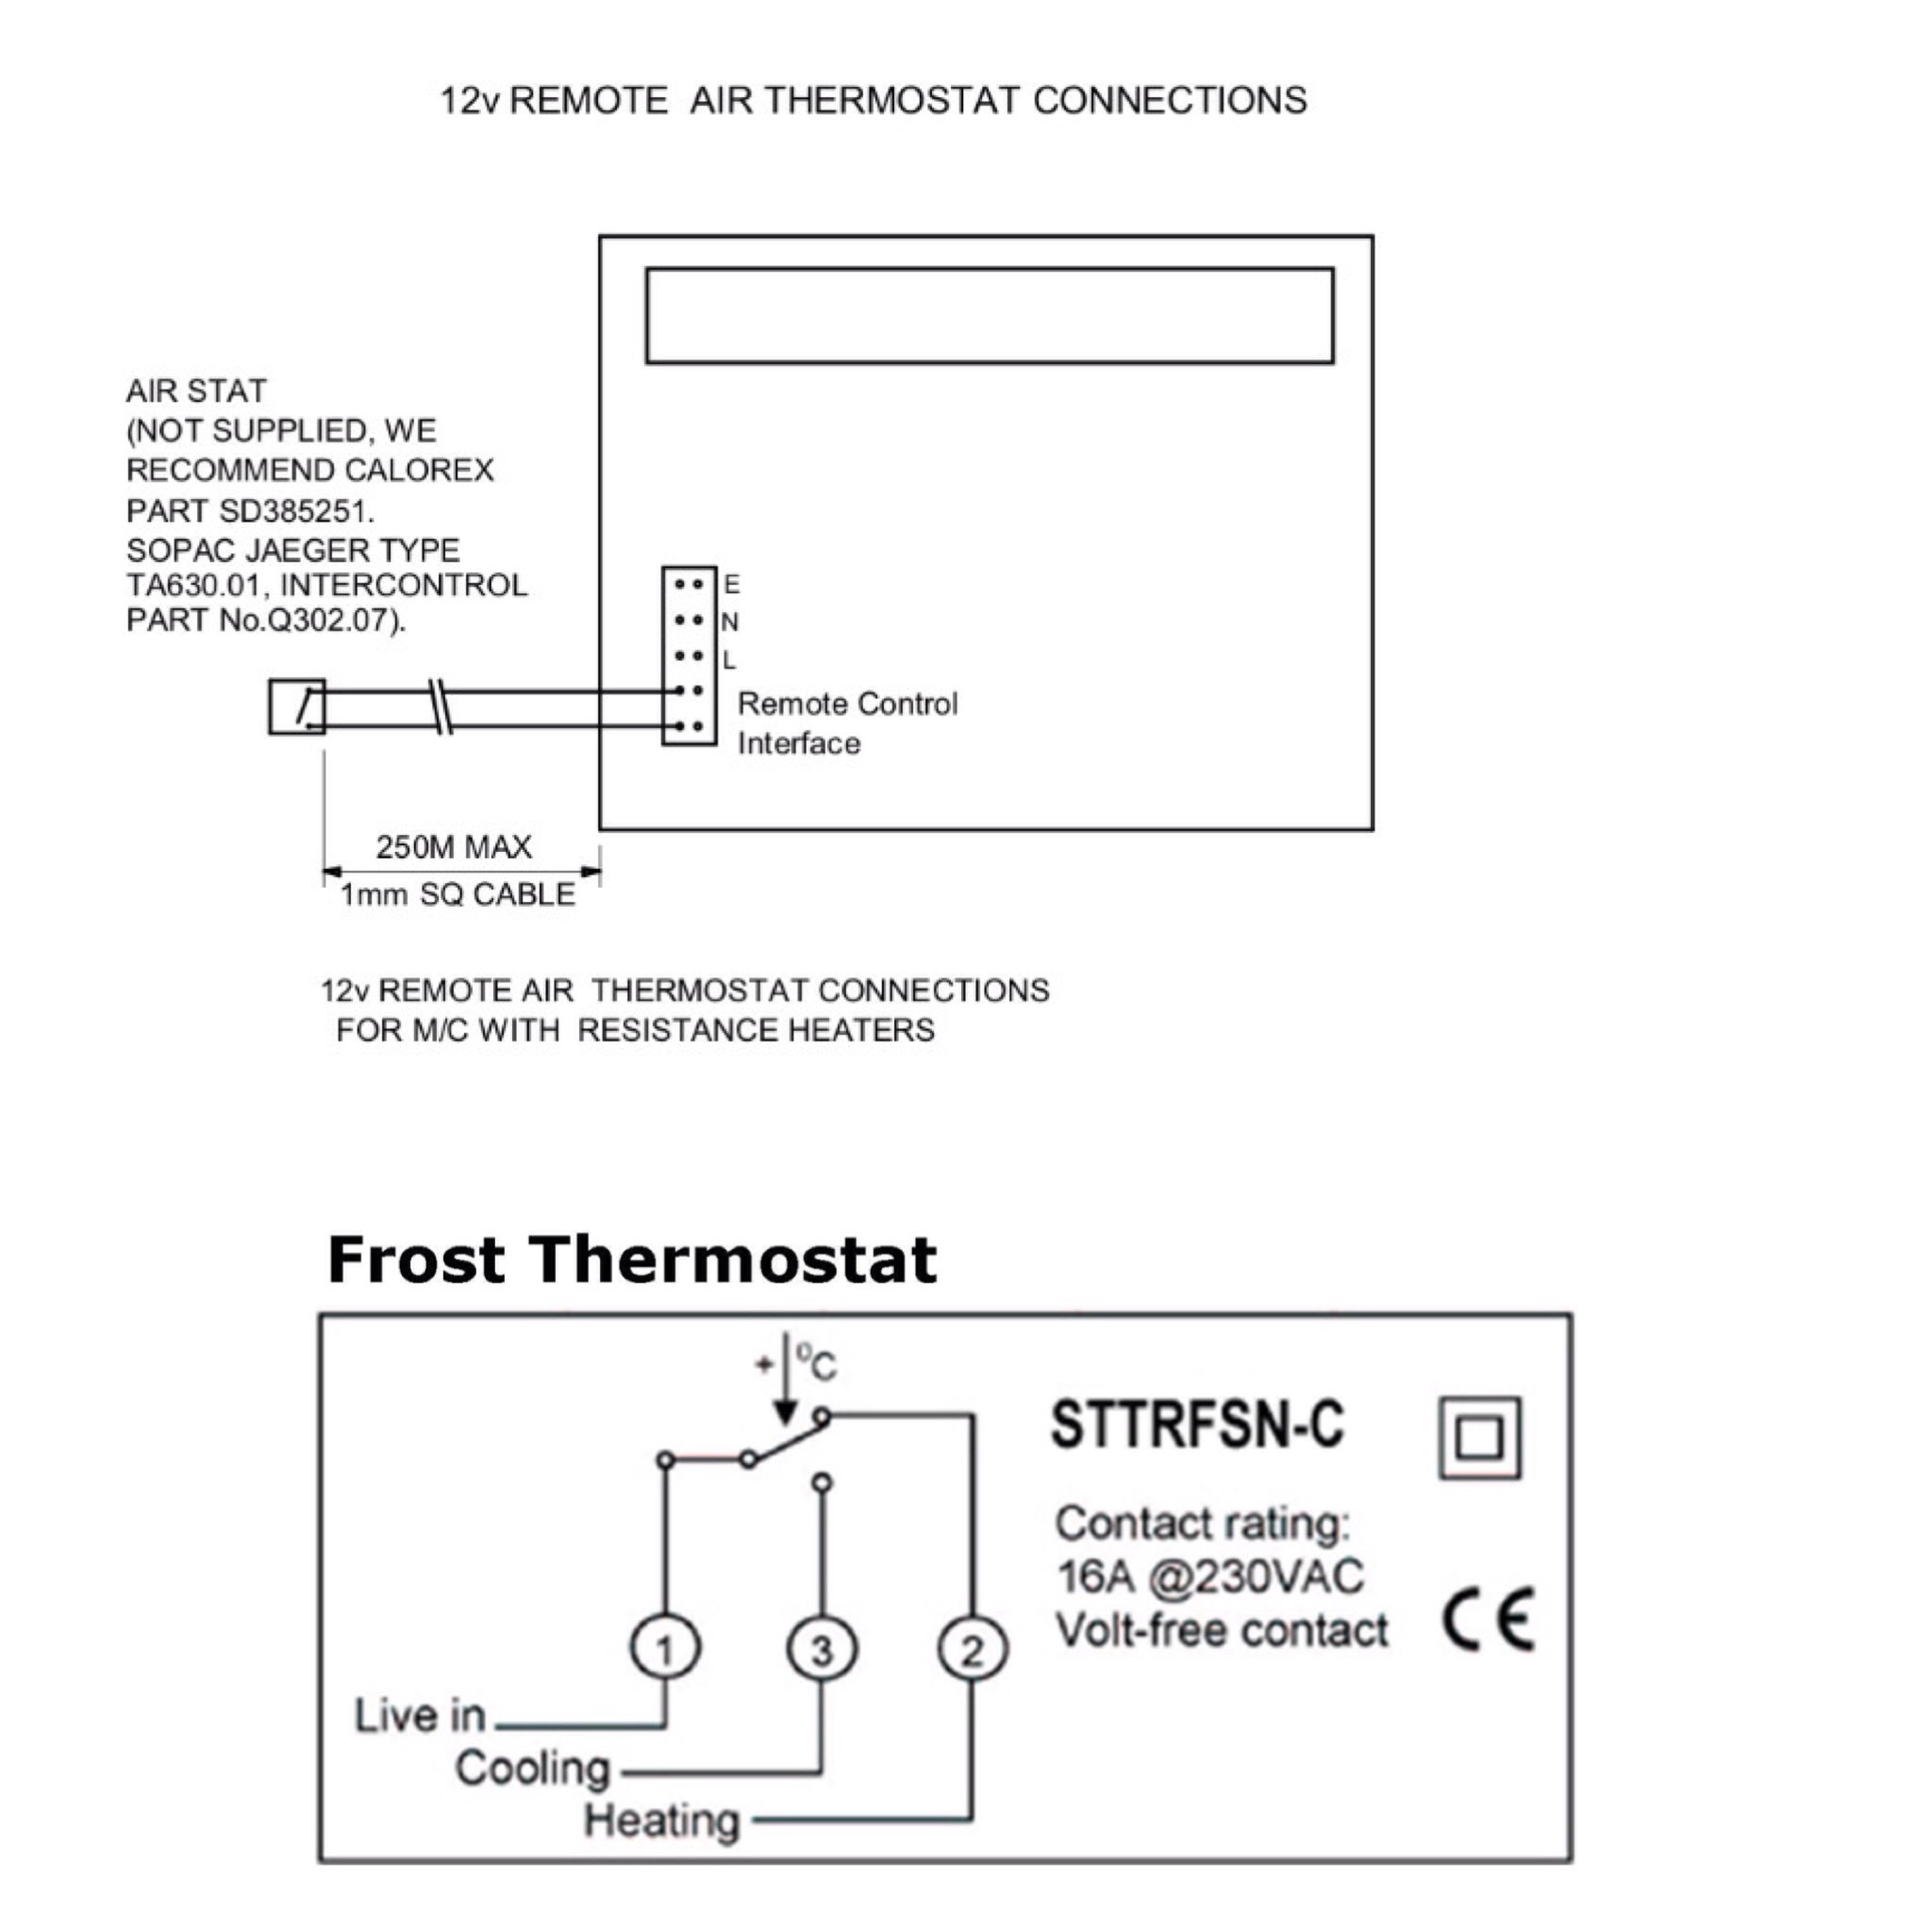 Hi, new to the forum - looking for advice on thermostats IMG_1351.JPG - EletriciansForums.net